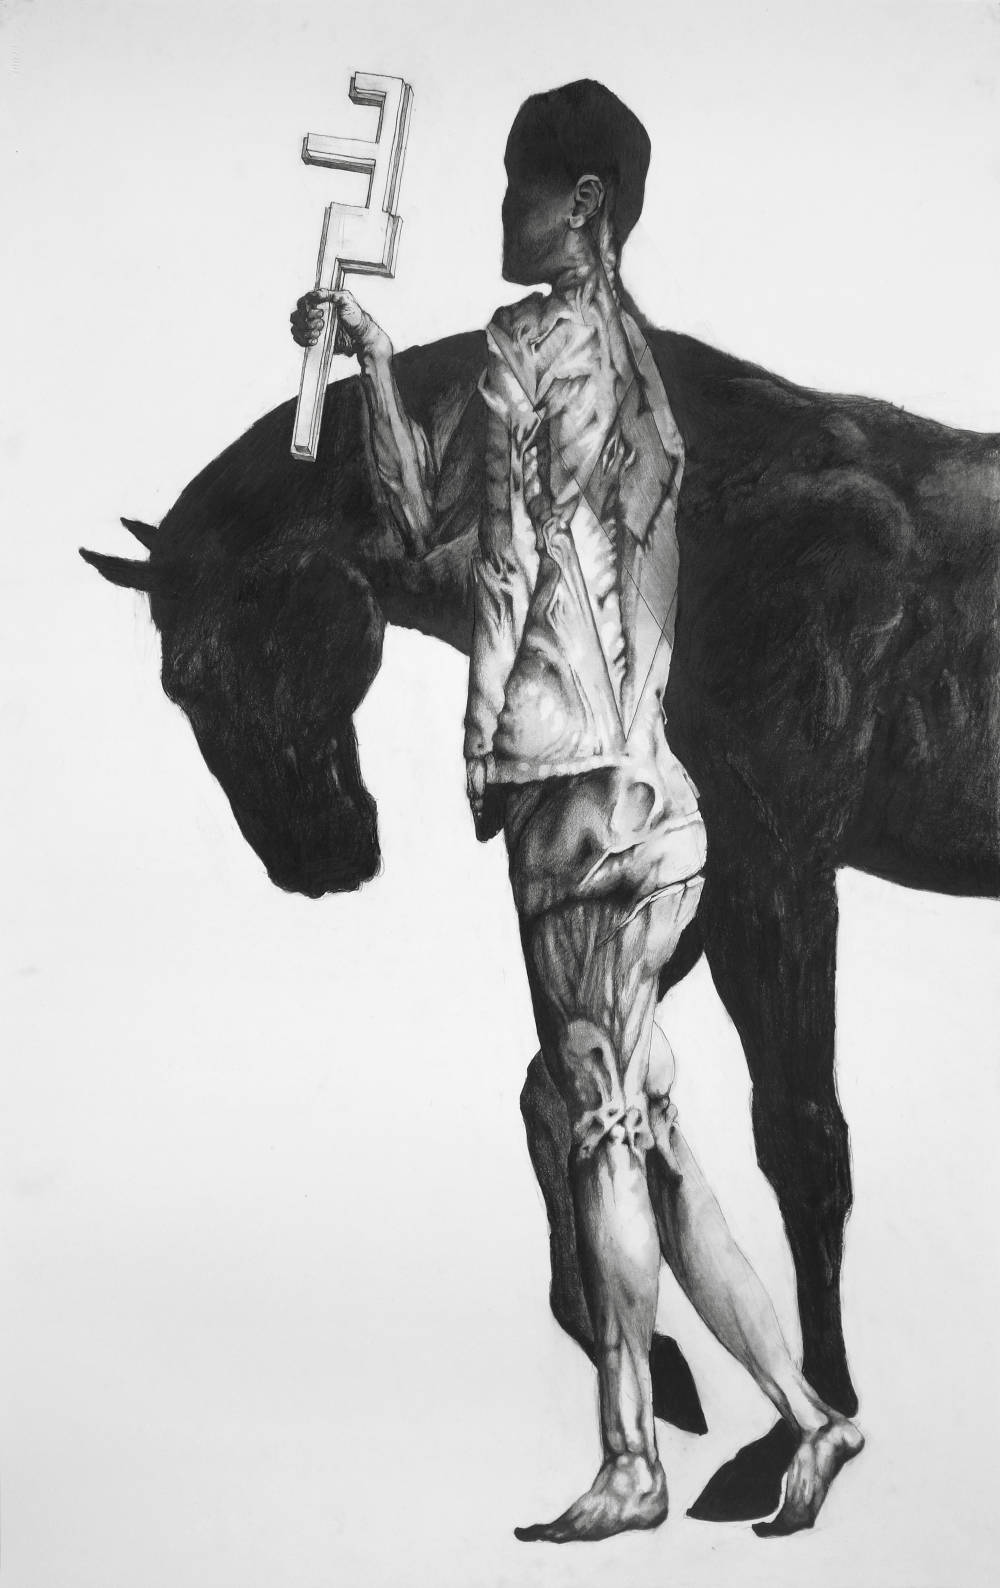 Graphite drawing of a figure walking beside a horse holding a geometric tool in its hands.